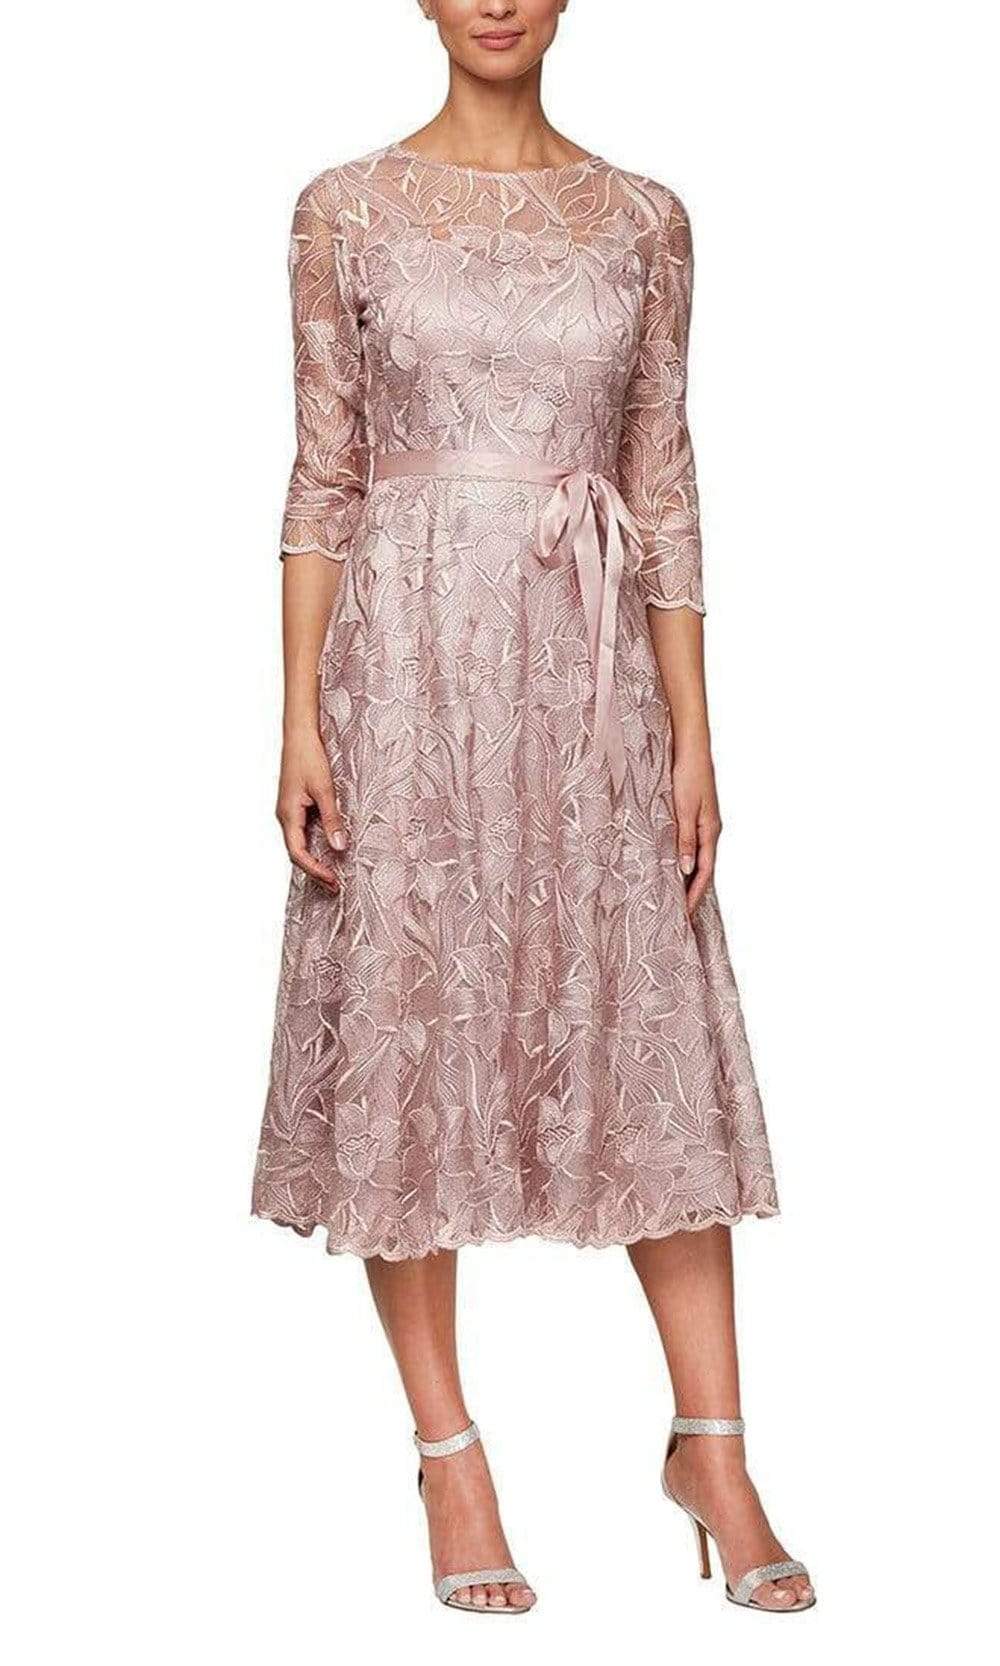 Image of Alex Evenings - 8117835 Quarter Sleeves Embroidered A-Line Dress